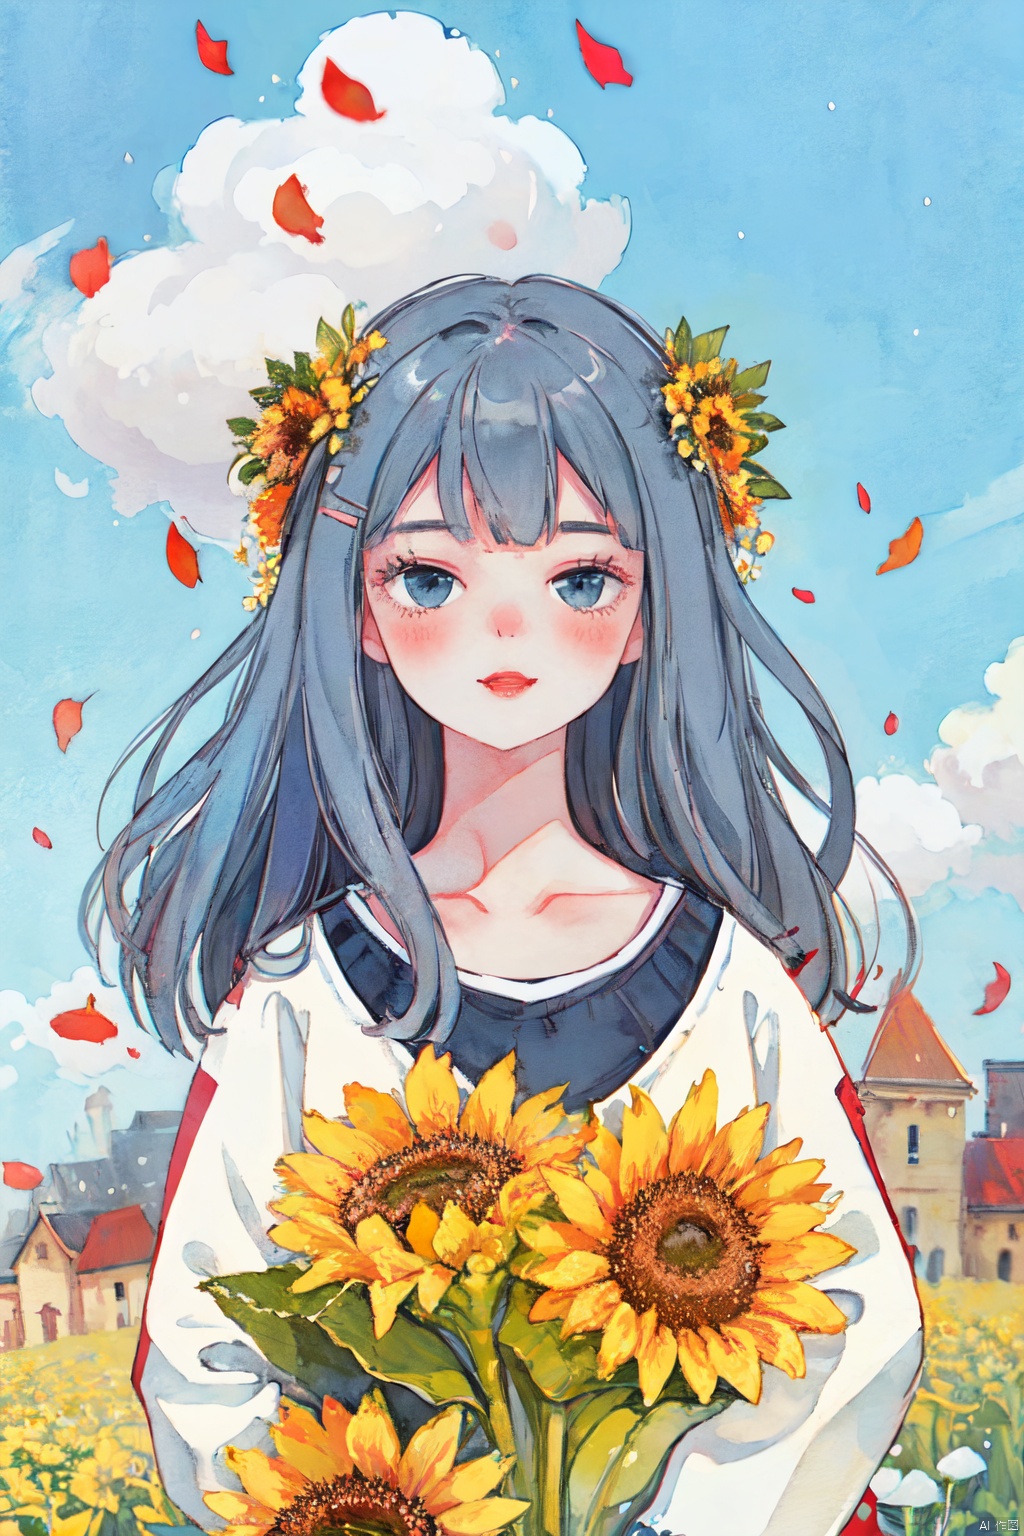  1 girl,flowers (innocent grey),Sky blue hair,standing,1girl, bangs, blue_sky, blush, bouquet, breasts, city, cityscape, cloud, cloudy_sky, collarbone, confetti, daisy, day, falling_petals, fence, ferris_wheel, field, flower, flower_field, hair_ornament, hairclip, holding, holding_flower, house, jacket, leaves_in_wind, long_hair, long_sleeves, looking_at_viewer, open_clothes, open_jacket, outdoors, petals, rose_petals, sky, skyline, skyscraper, smile, solo, sunflower, tower, upper_body, wind, windmill, yellow_flower, (wide shot, mid shot, panorama), blurry,Nebula, flowing skirts,（smoke）,Giant flowers, light master, CGArt Illustrator